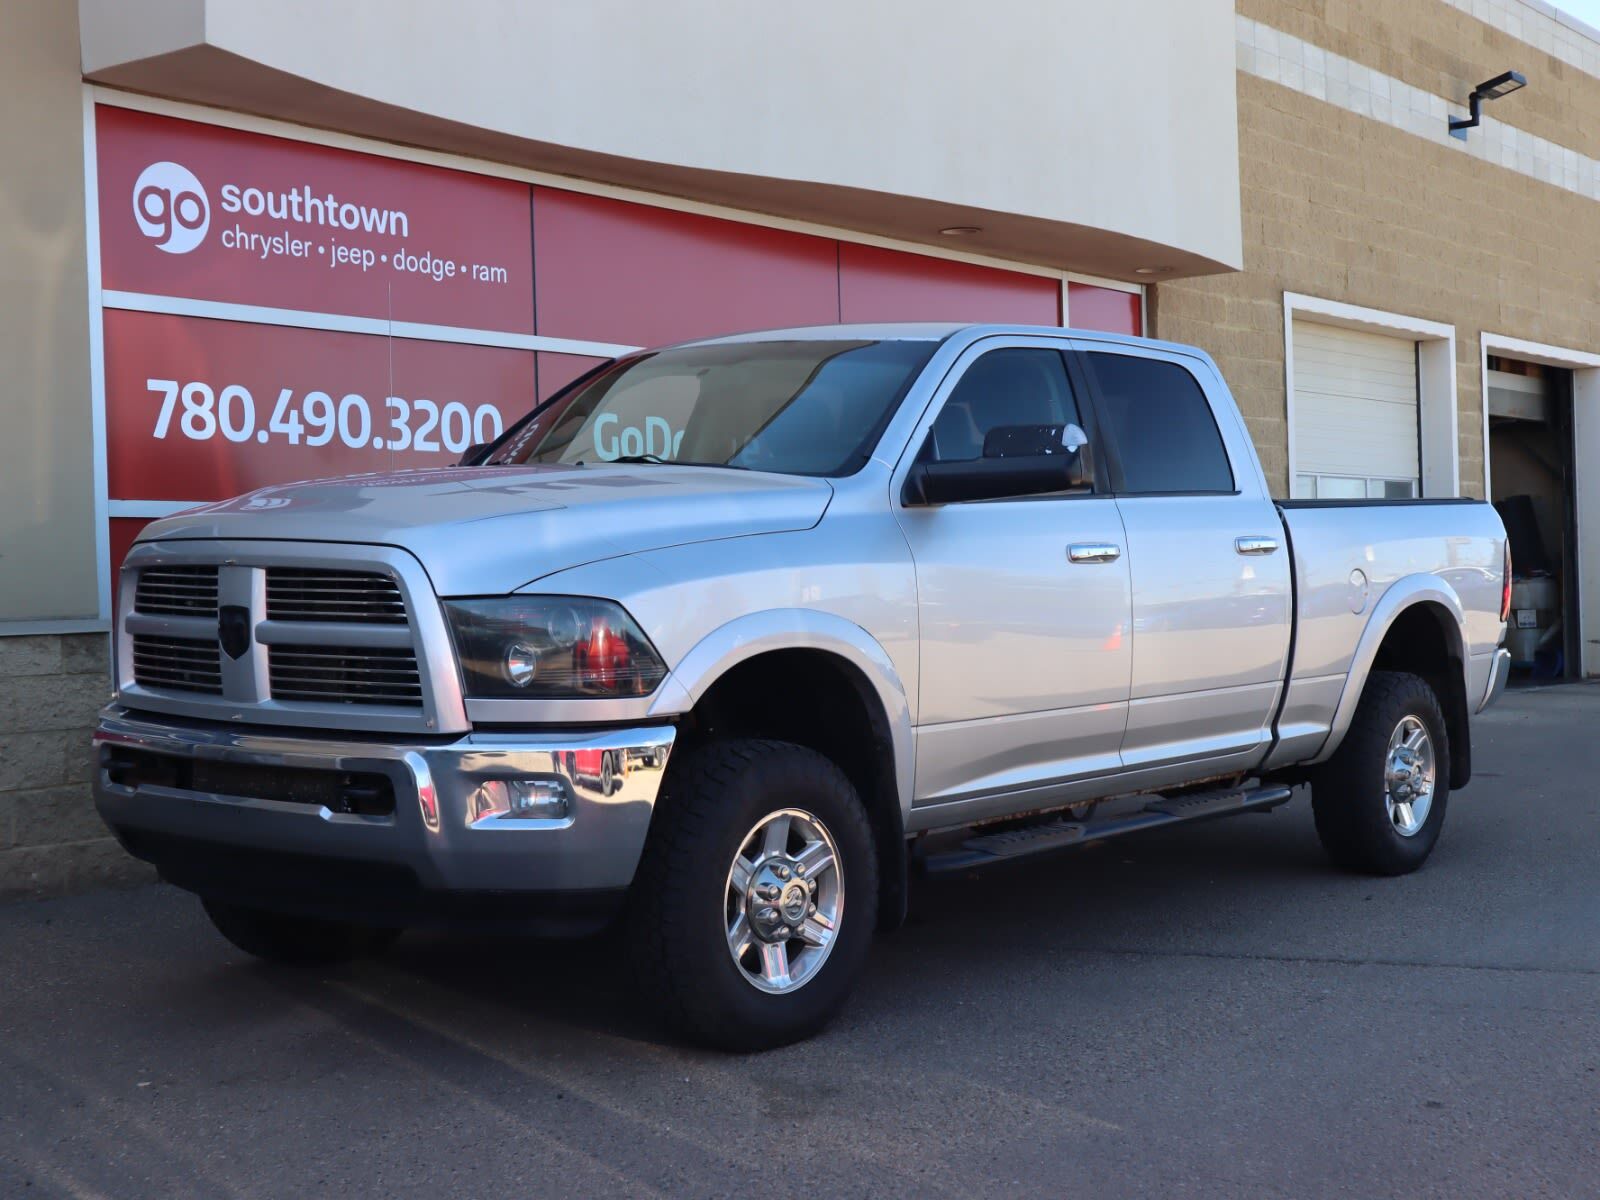 2012 Ram 2500 LARAMIE IN SILVER EQUIPPED WITH A 6.7L CUMMINS TUR